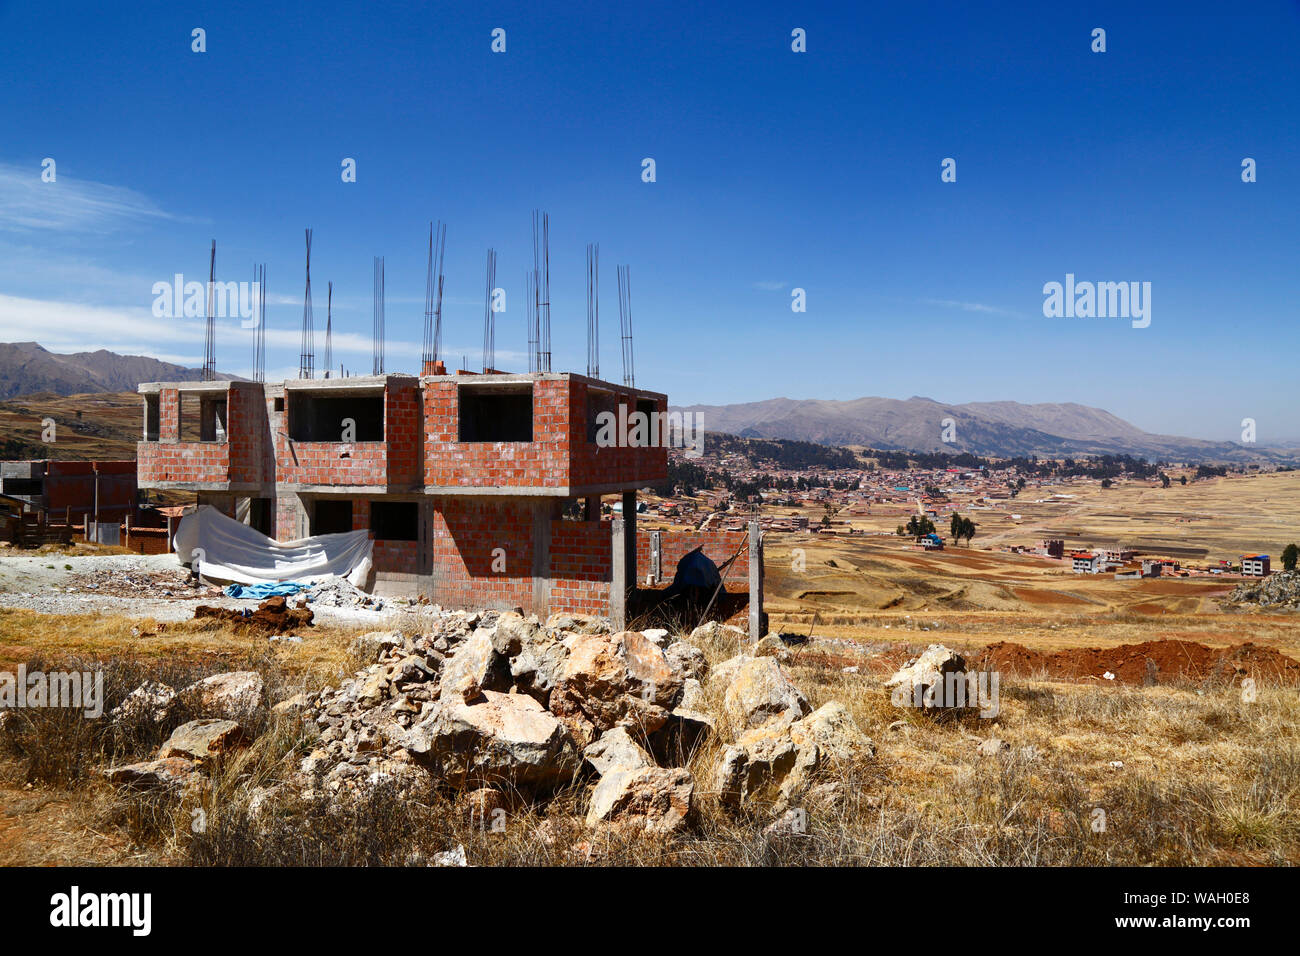 Building under construction at Nuevo Chinchero, near the original village of Chinchero (in background), financed by compensation for land bought by the government from familiies for the construction of a new airport for Cusco and Machu Picchu, Cusco Region, Peru Stock Photo